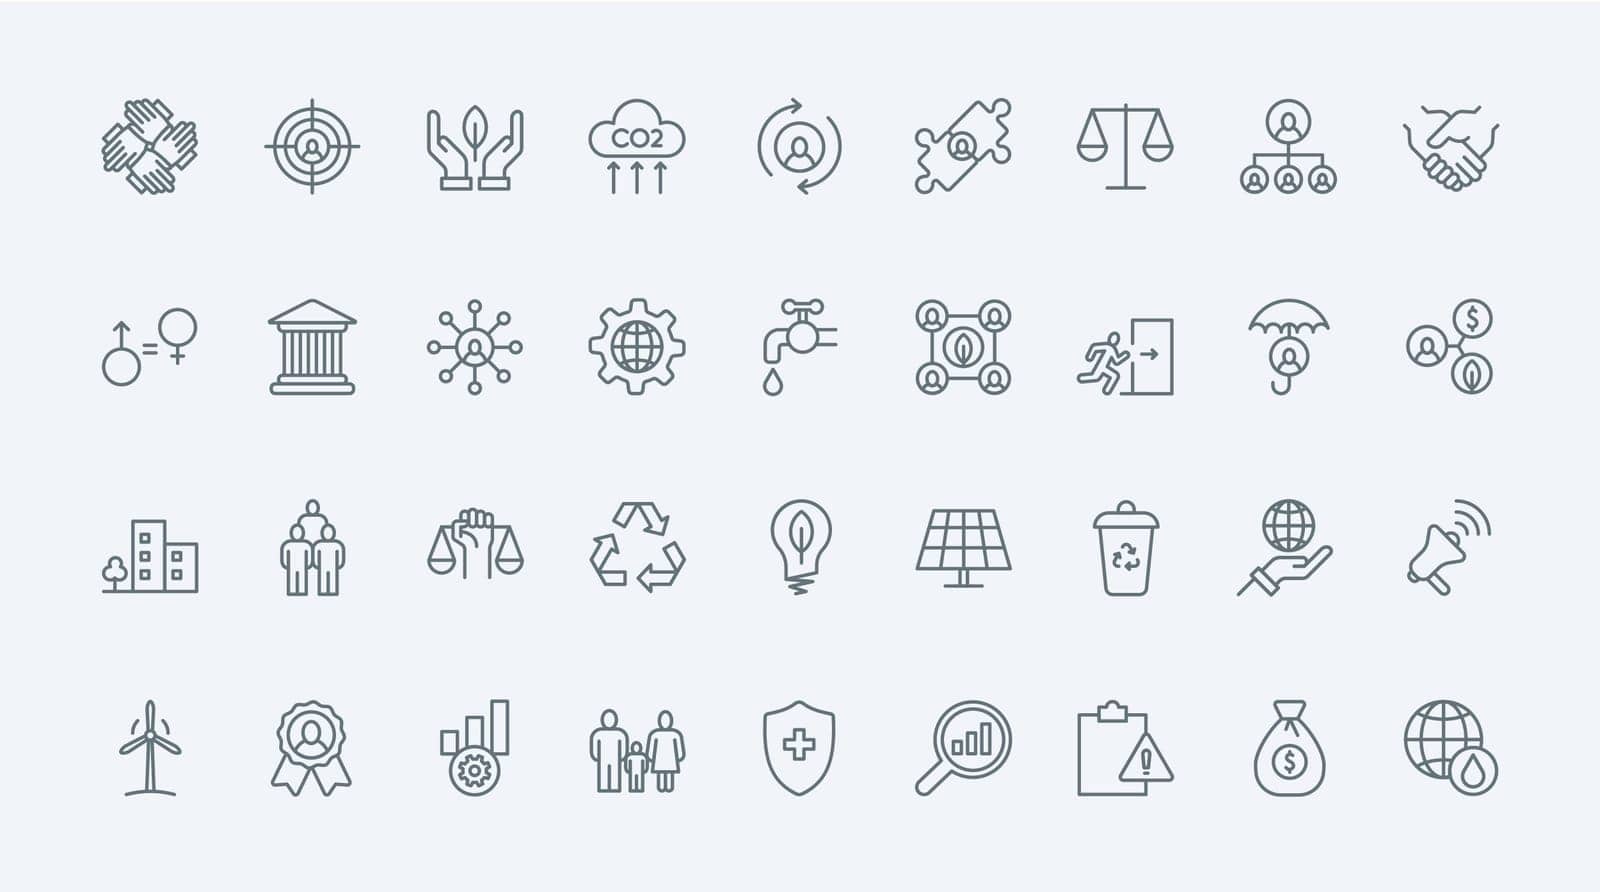 ESG thin line icons set vector illustration. Outline pictograms of environmental, social criterias for corporate management, investment and organisation of company, financial care, safety and ethics